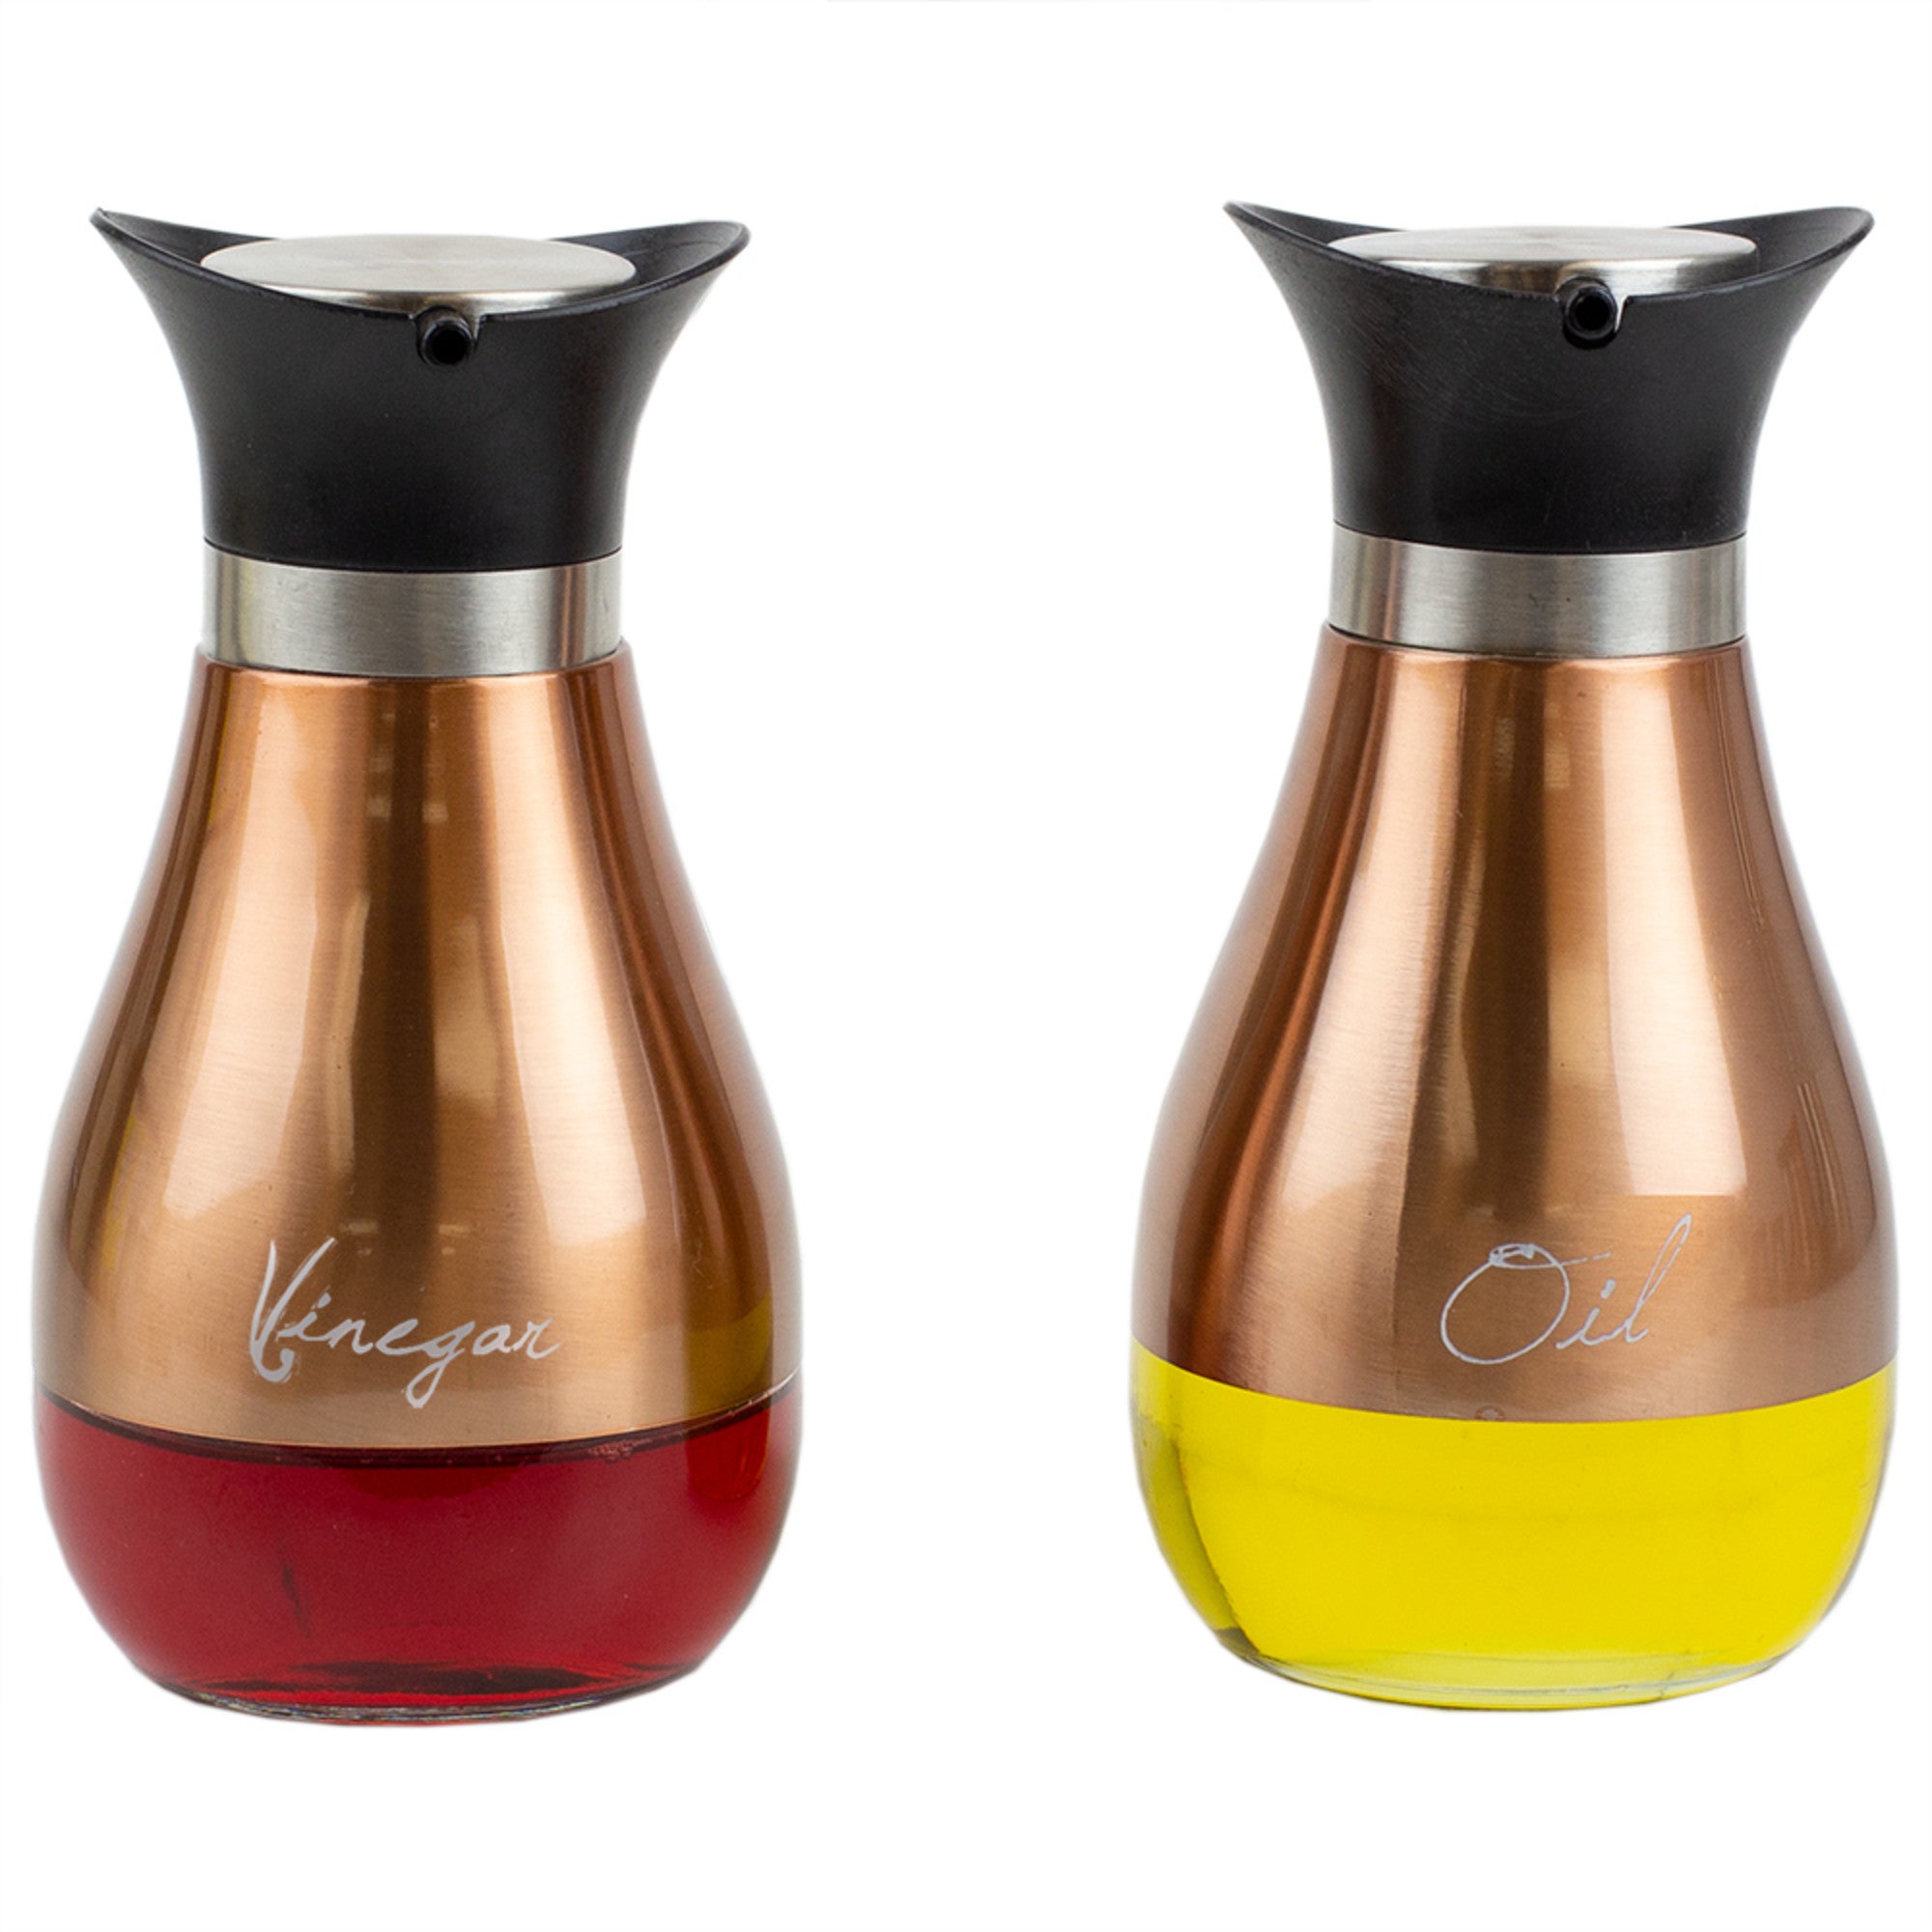 Home Basics 2 Piece Steel Oil and Vinegar Set with See-Through Glass Base, Copper - Assorted Colors